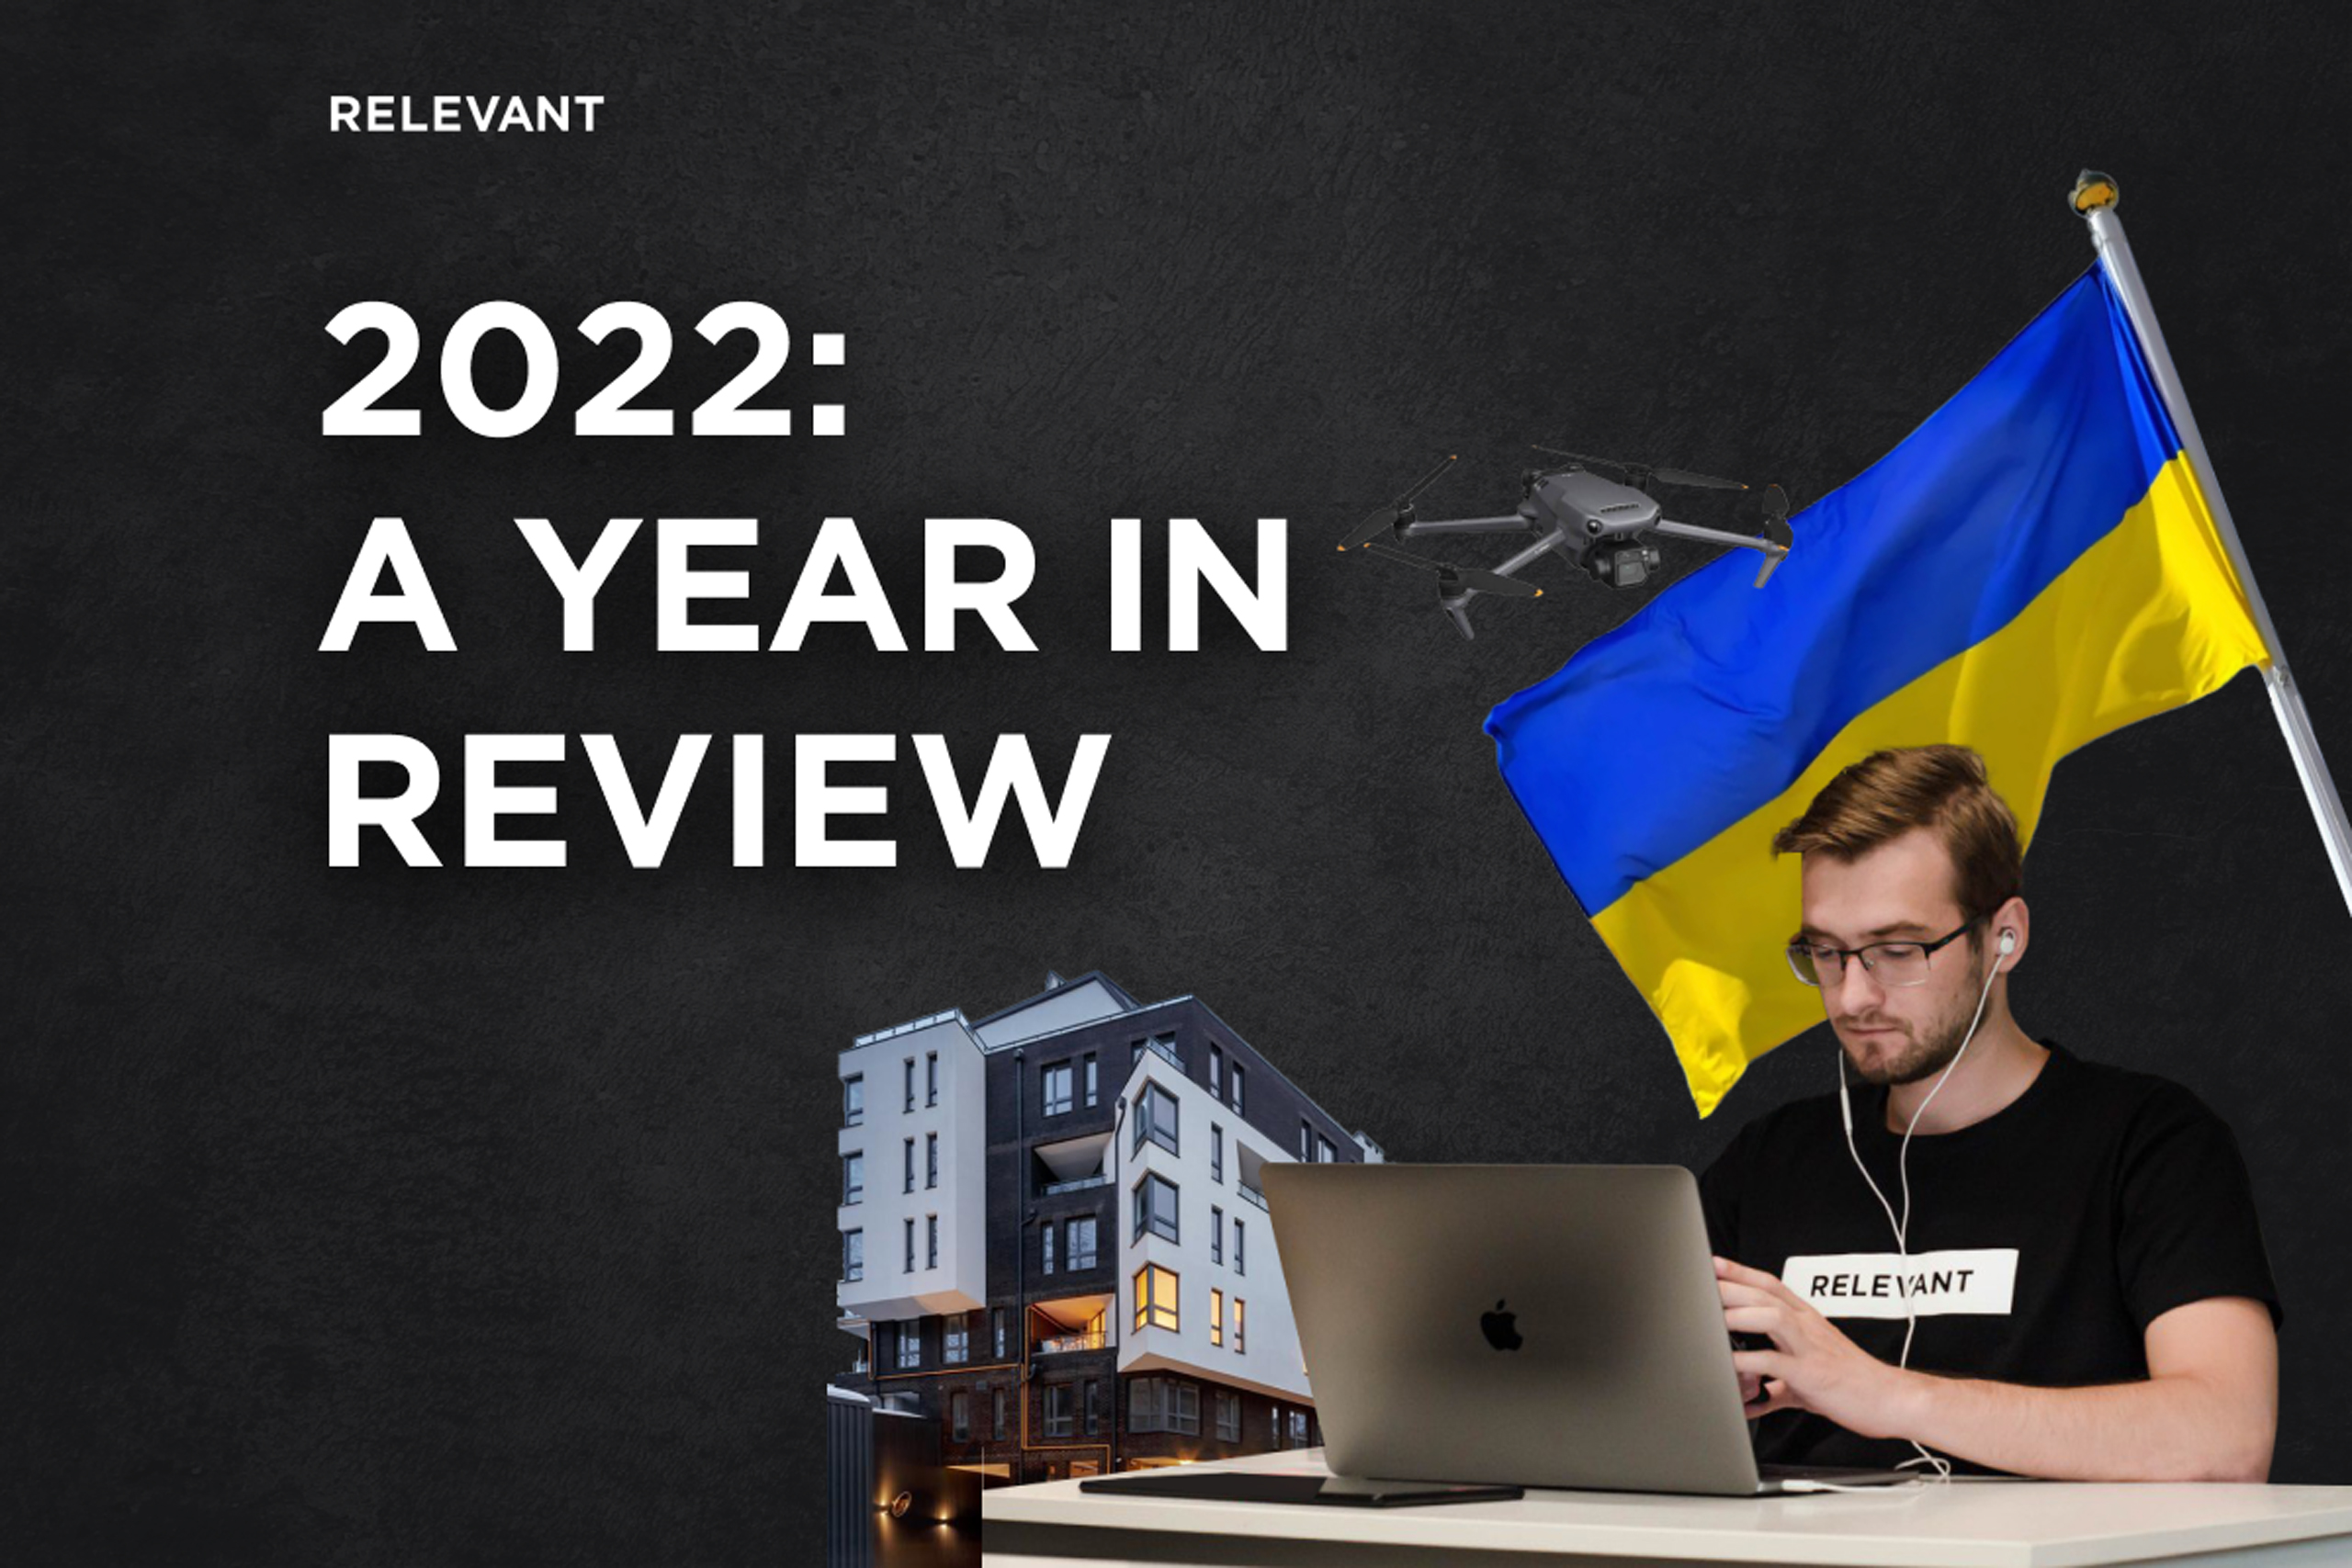 When life gives you lemons, make lemonade. 2022: A Year In Review